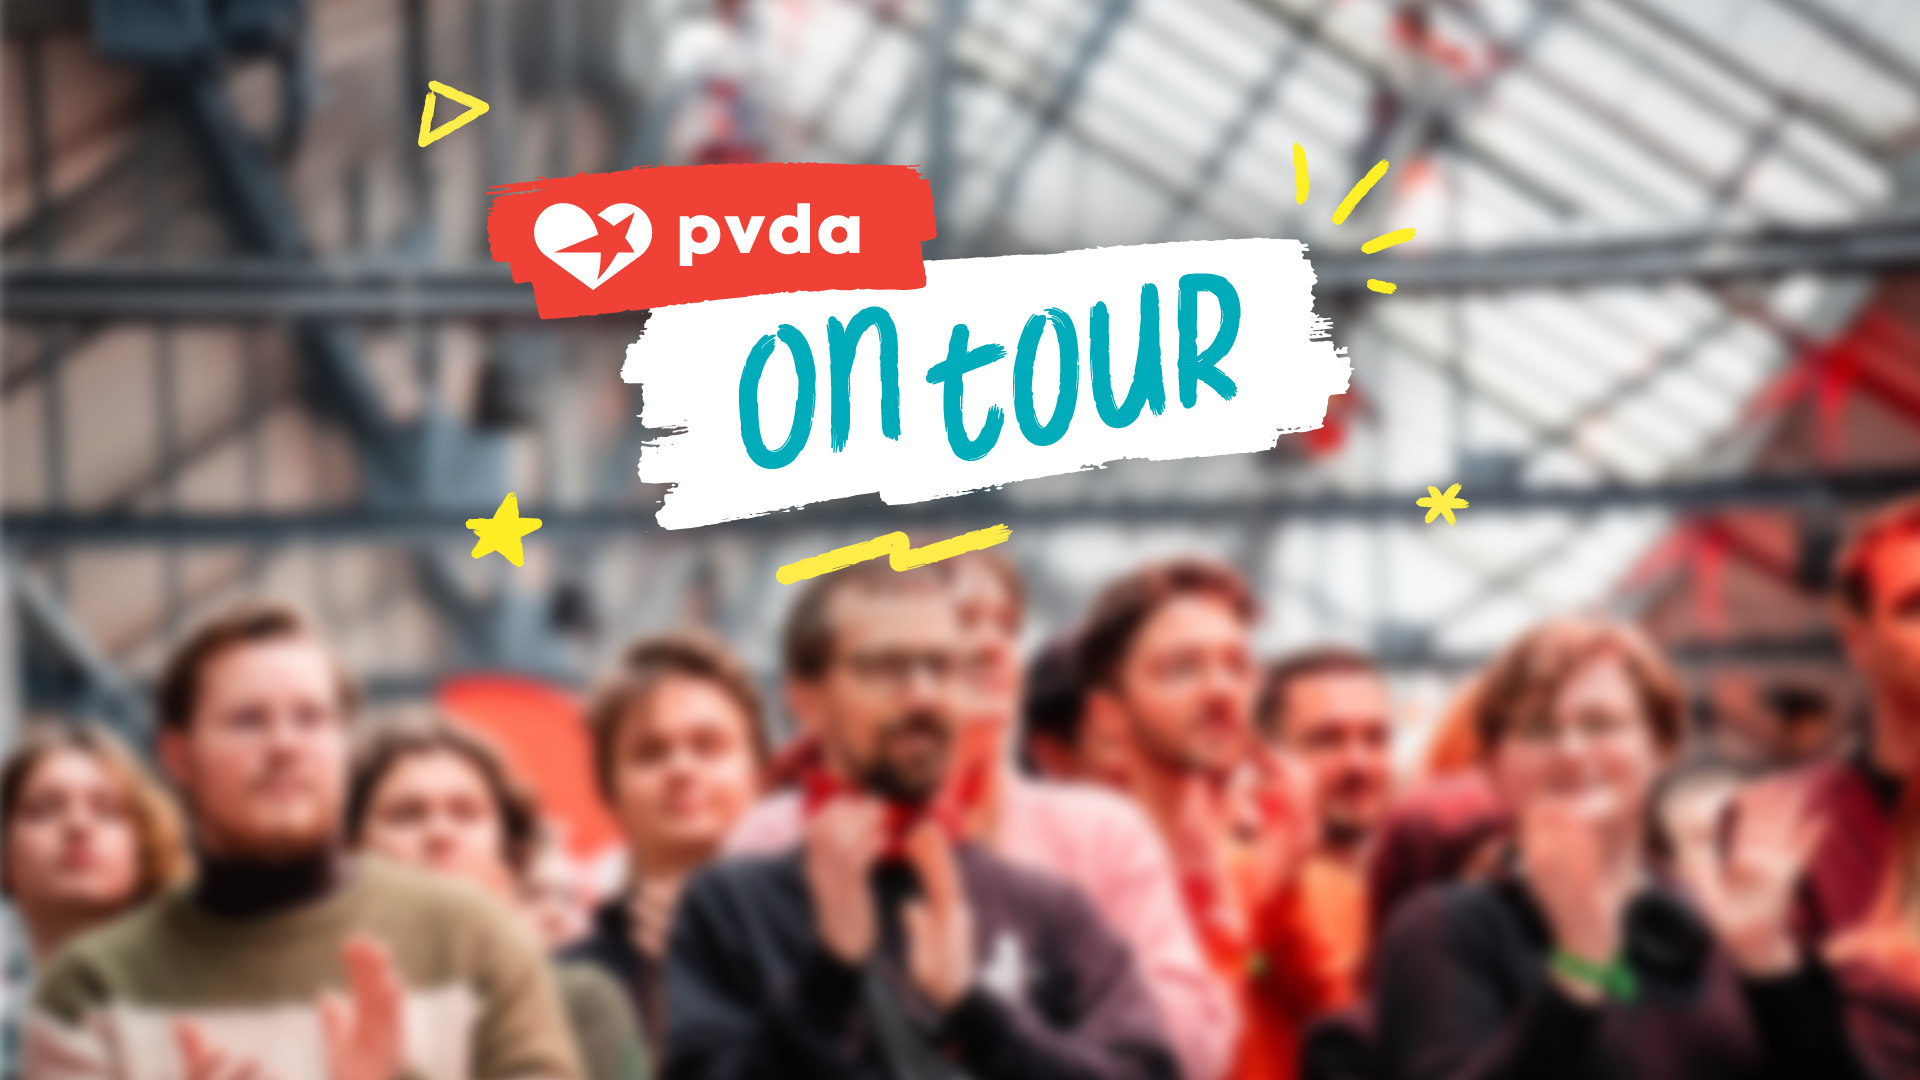 PVDA On Tour in Gent